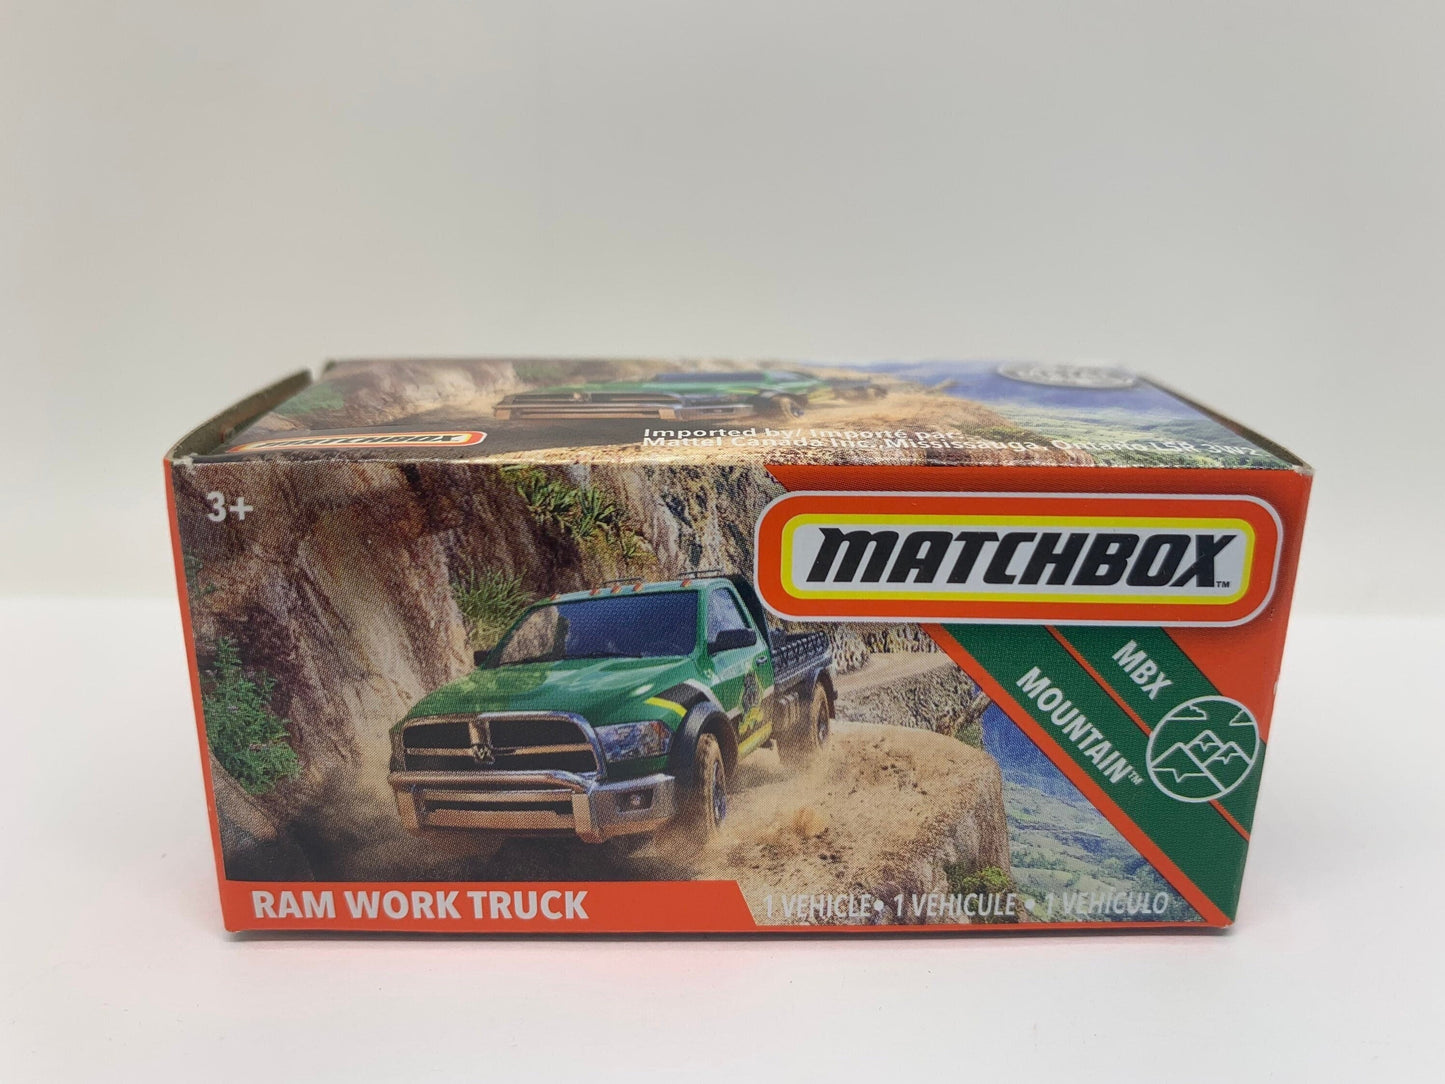 Matchbox Ram Work Truck Green MBX Mountain Perfect Birthday Gift Miniature Collectable Model Toy Car